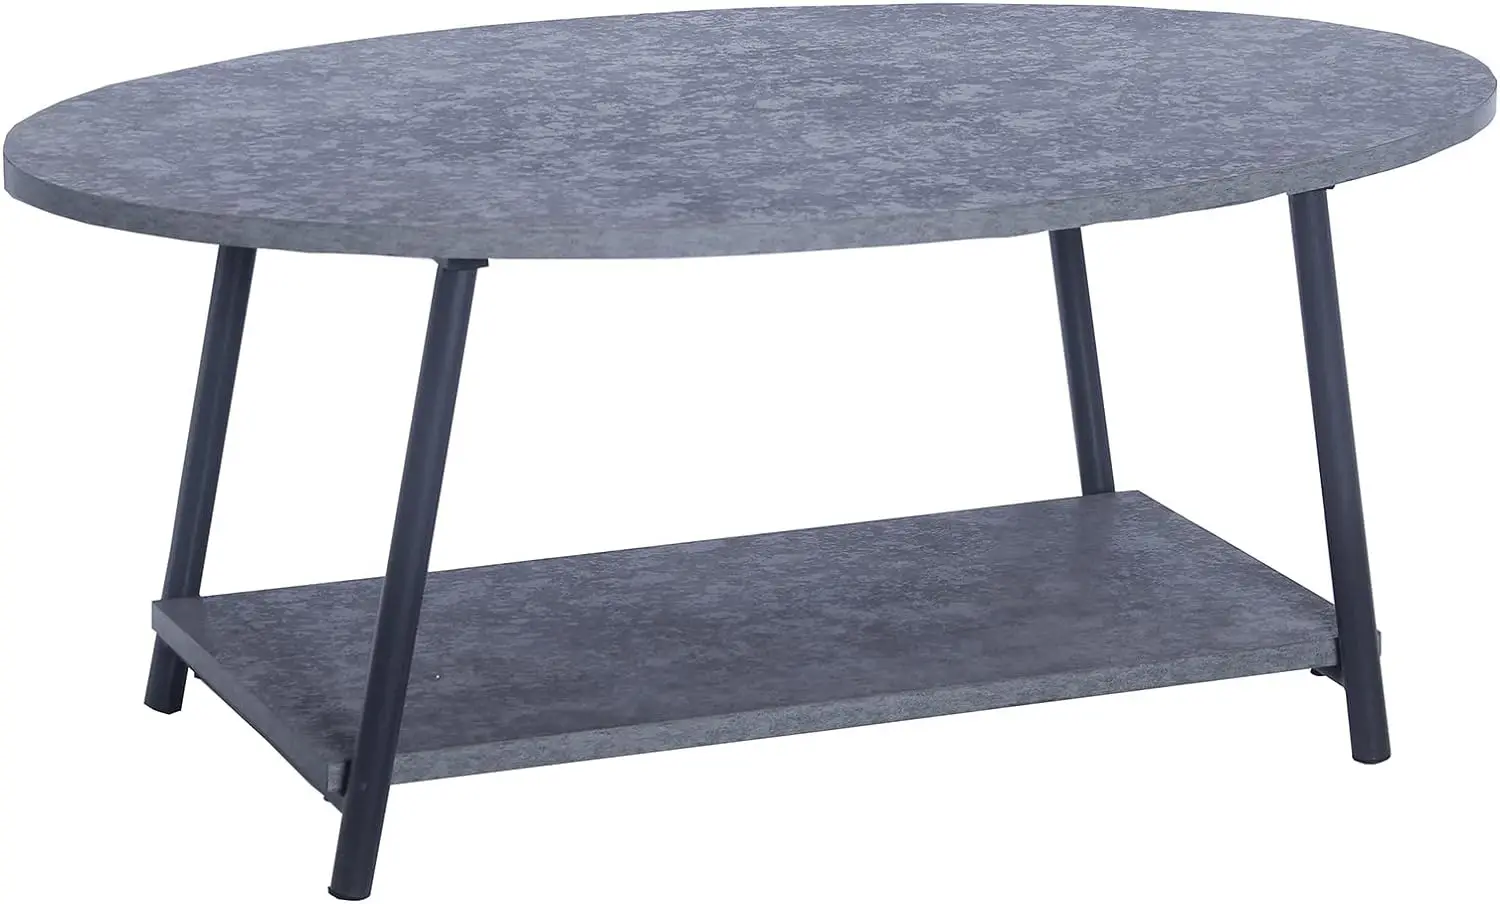 Oval Coffee Table with Storage Shelf Rustic Slate Concrete and Black Metal Small coffee table End table for bedroom Mesas Small